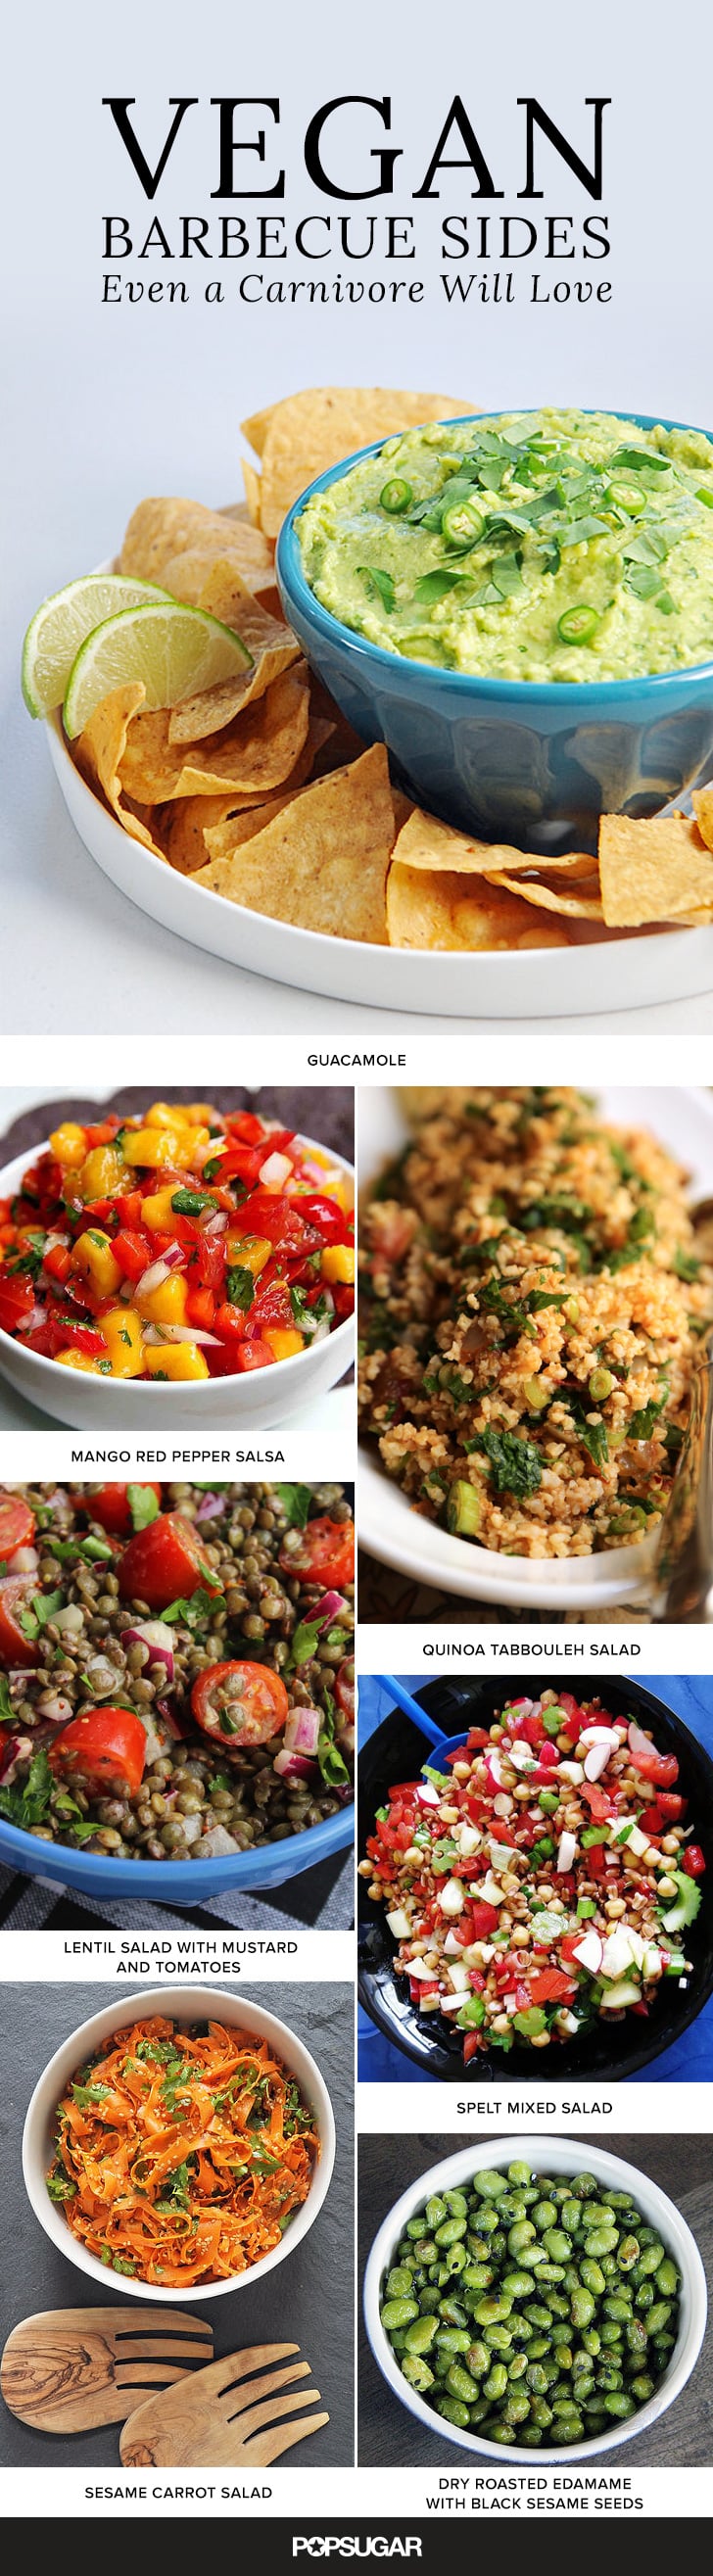 Vegan Barbecue Side Dishes